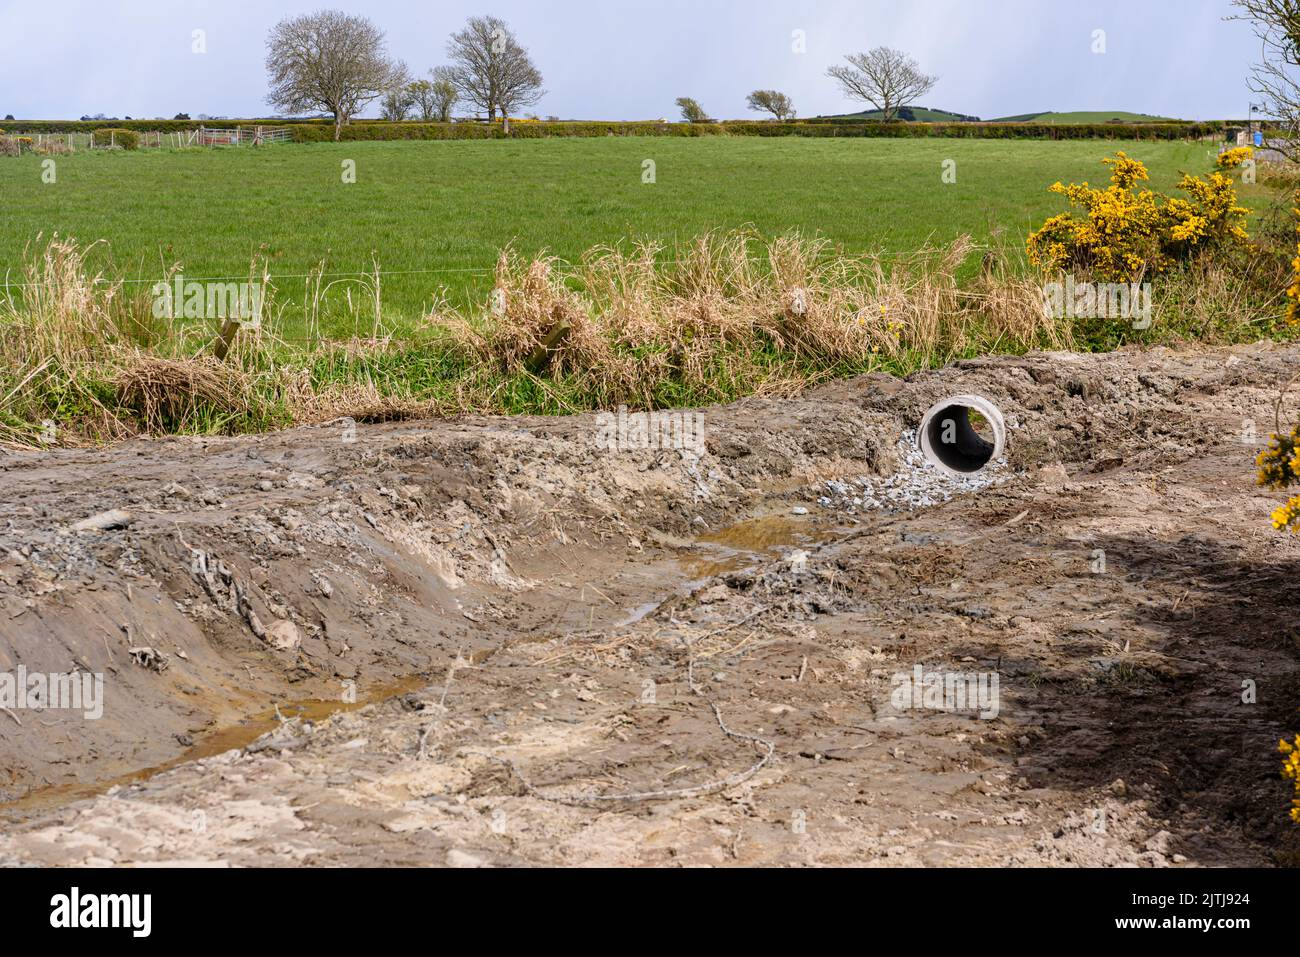 A drainage ditch is dug in a field, with a small culvert pipe to drain water into a small stream. Stock Photo